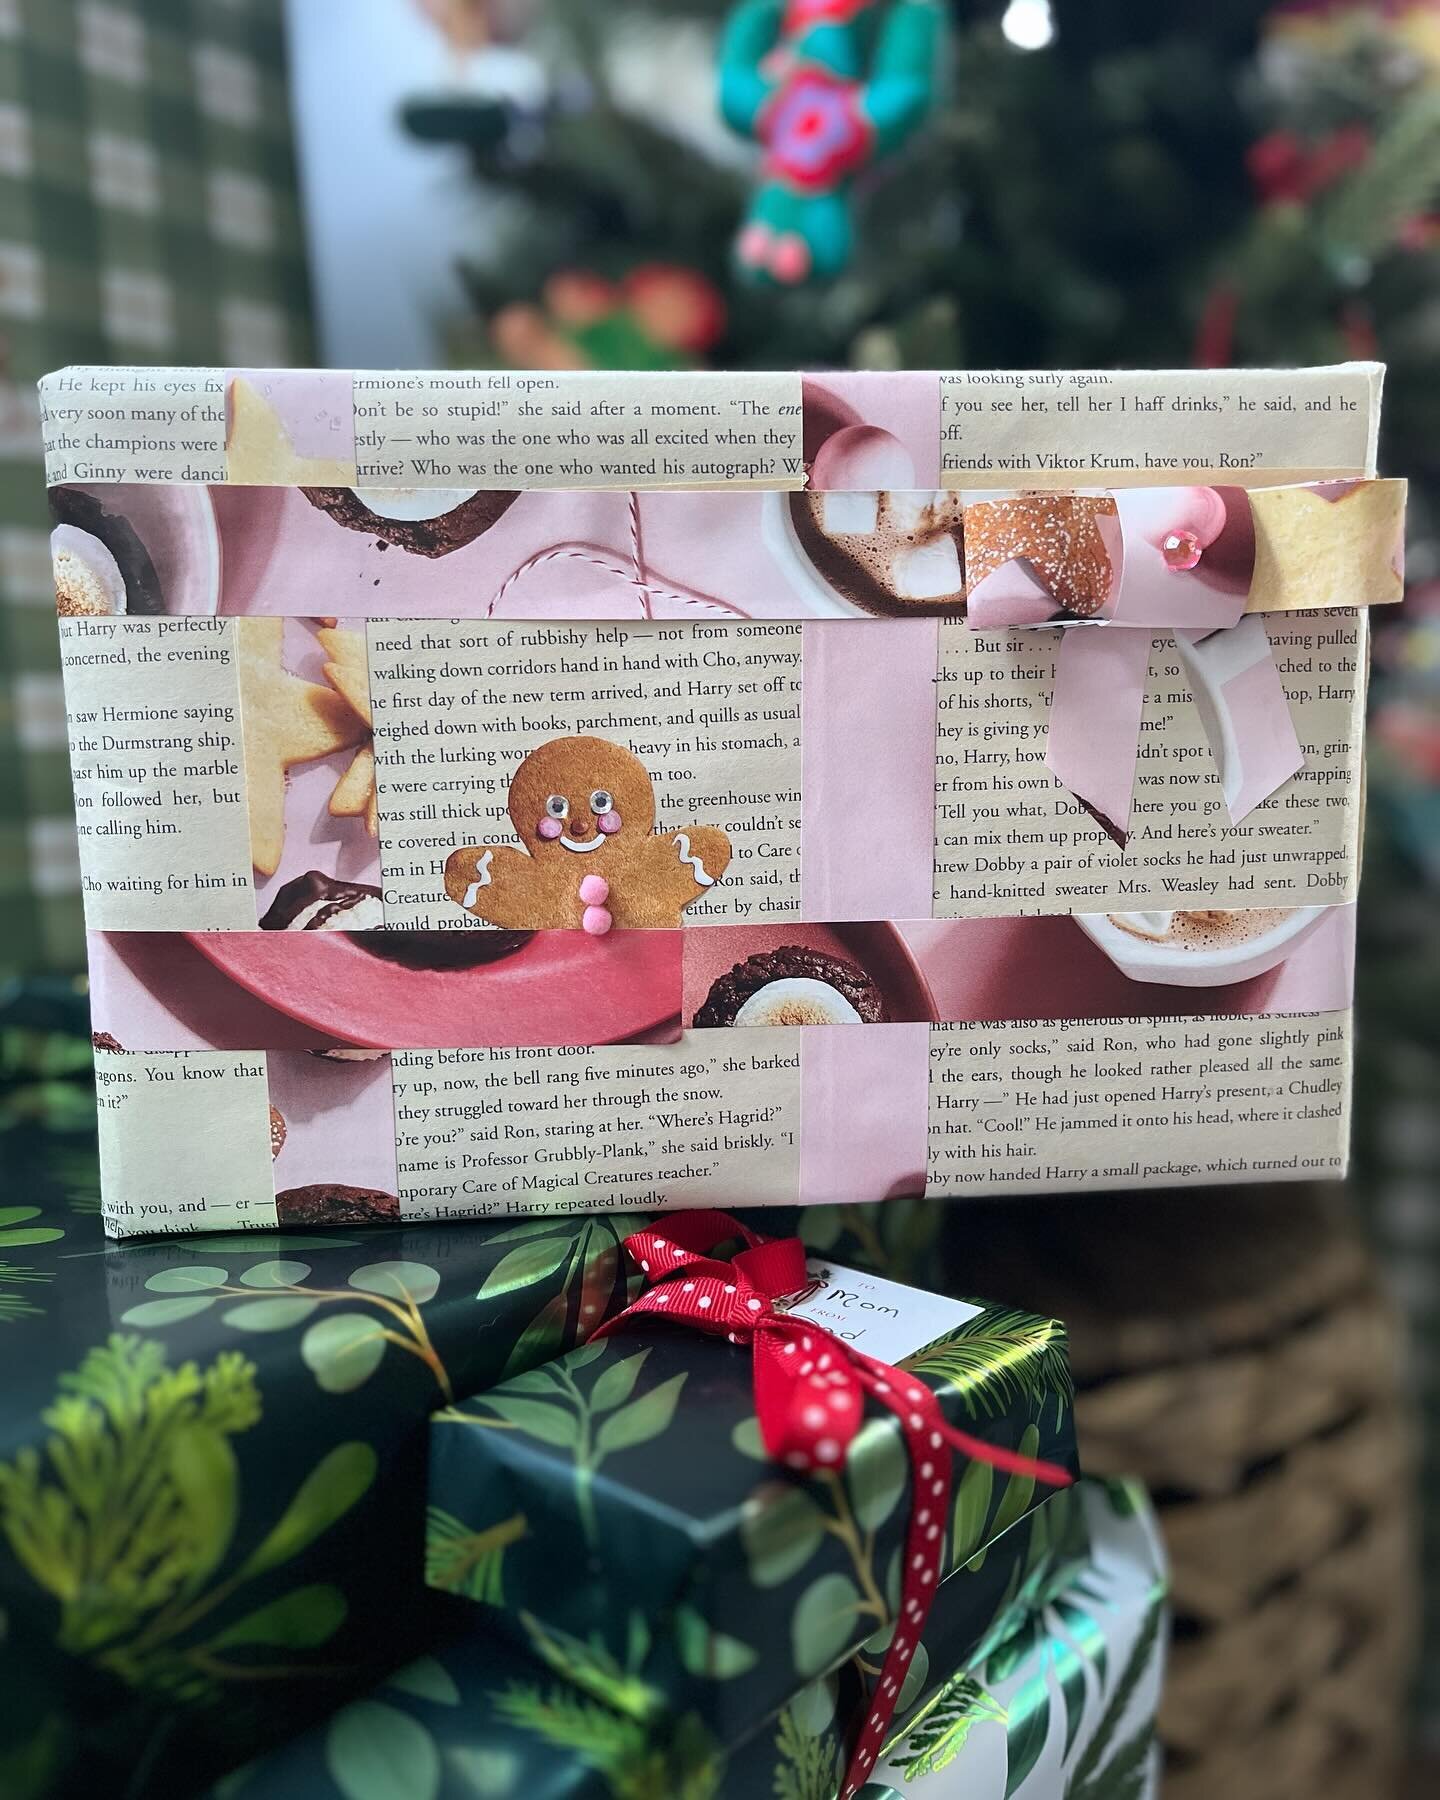 Them: Make sure your wrapping is recycled.
Me: But make it fashion, amirite?

Yeah, I brought that back. Witness my reuse of semi-ruined HP book pages and this month&rsquo;s King Arthur Baking catalogue. 

#upcycle #reducereuserecycle #upcycling #gif